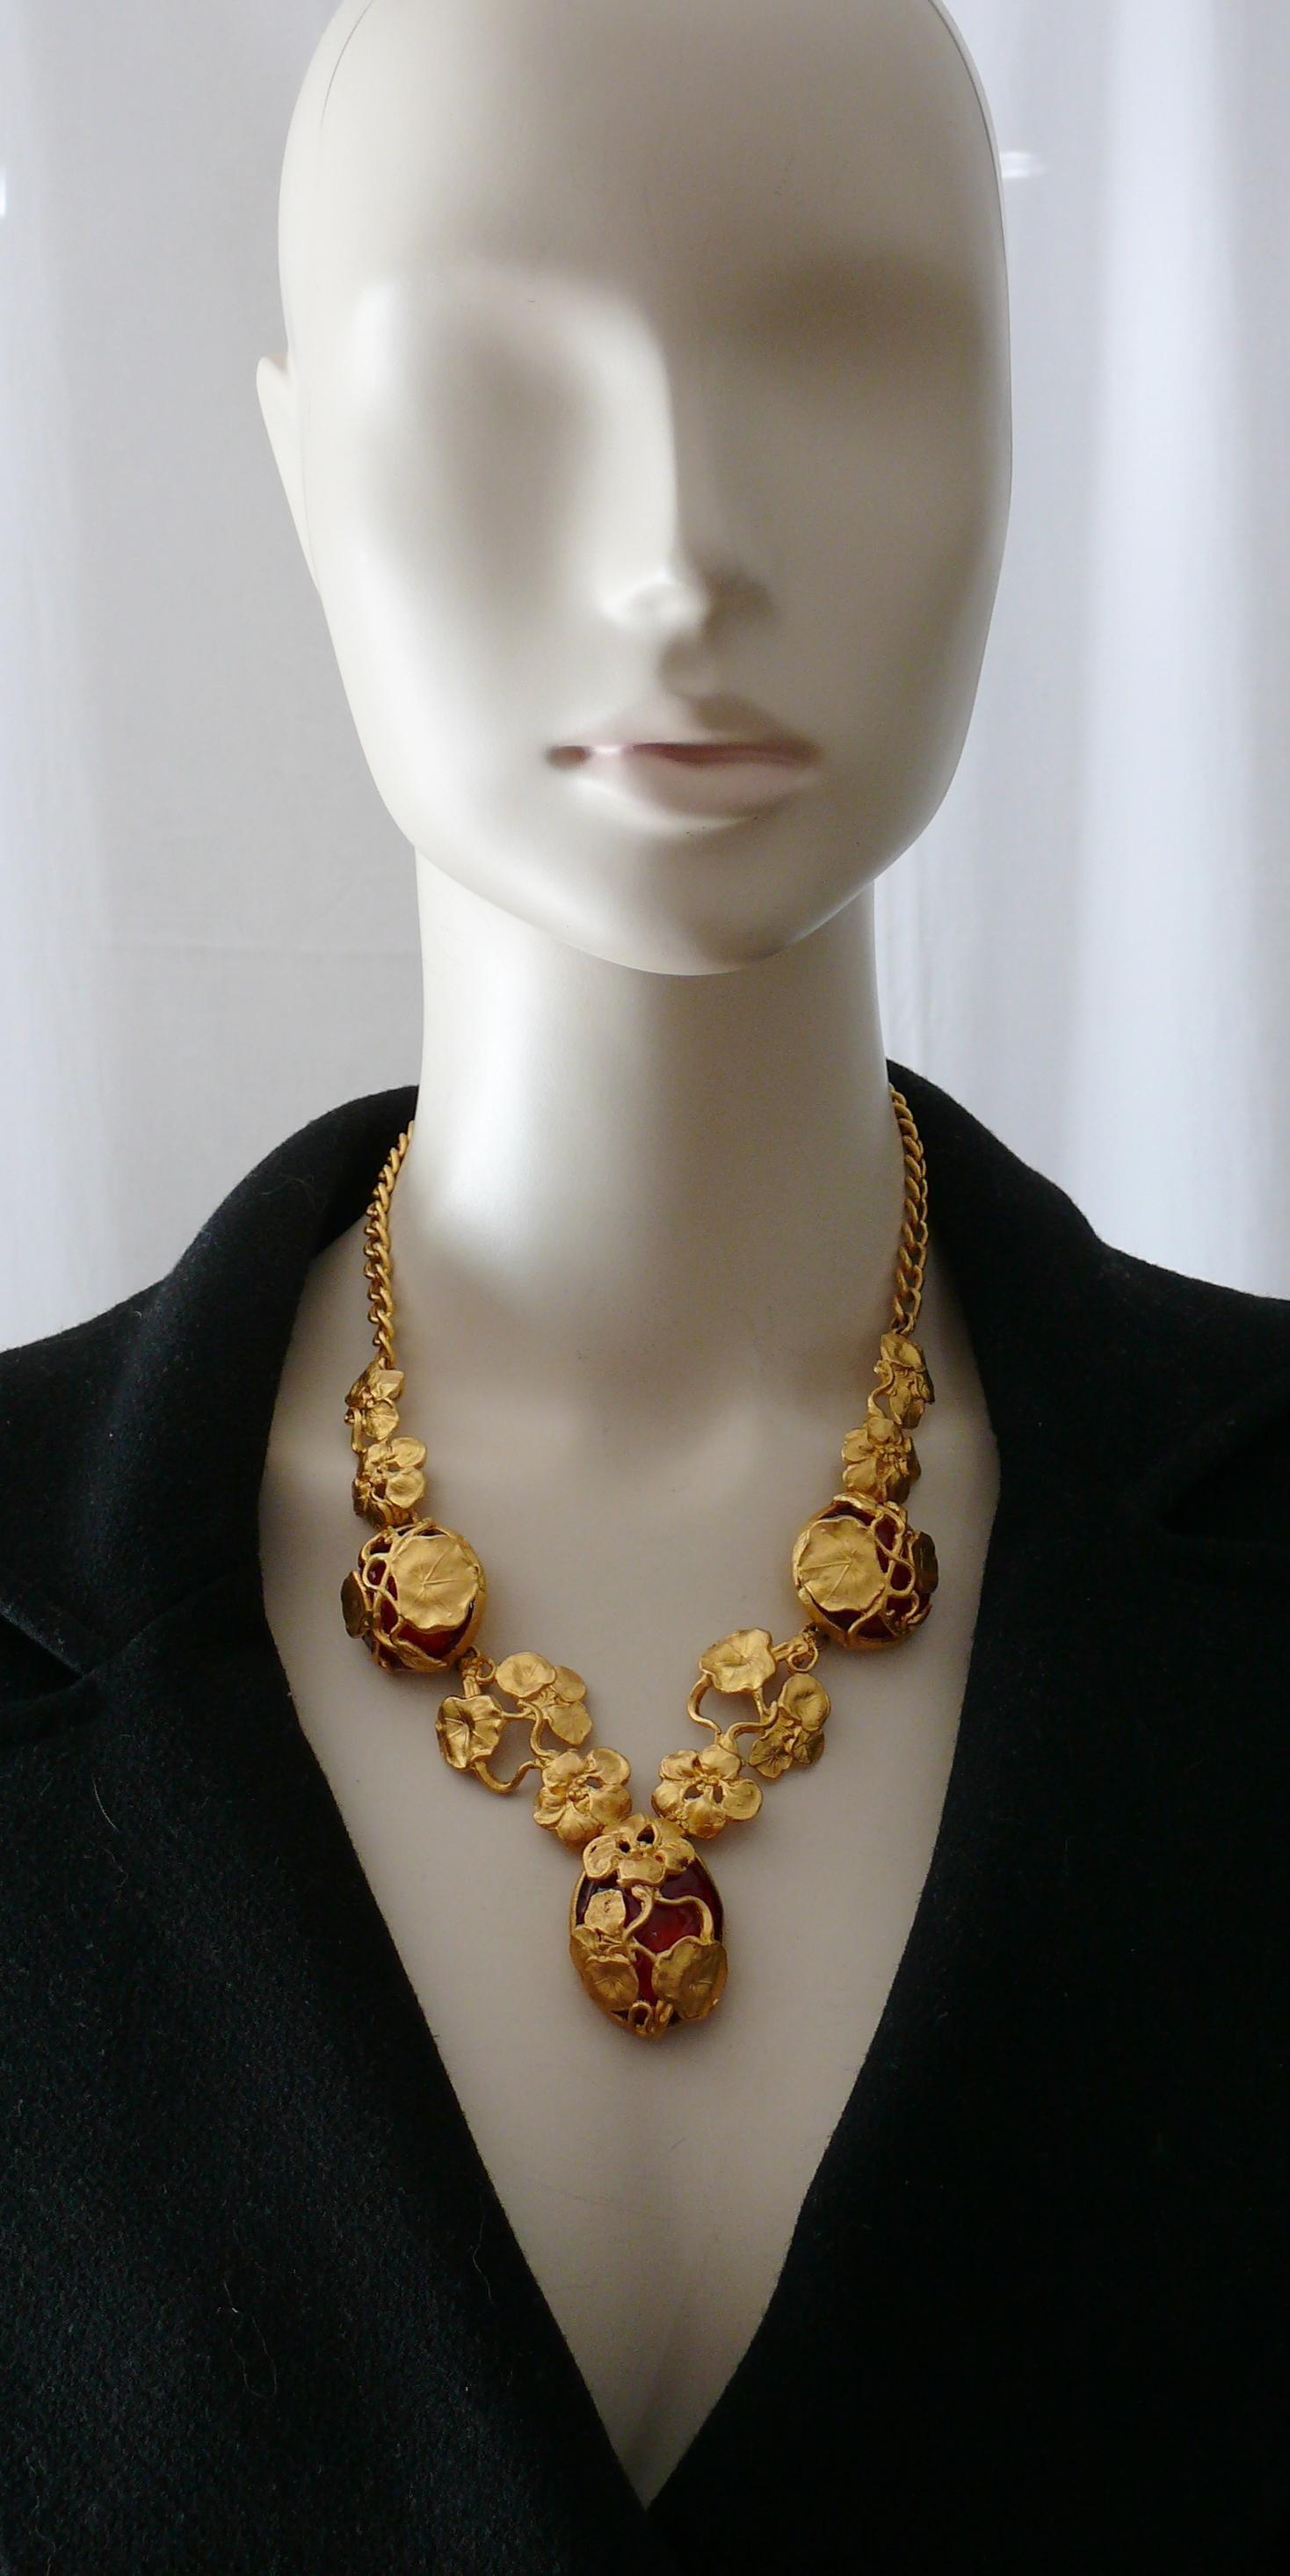 L'OR DU SOIR Paris gorgeous vintage gold toned floral ART NOUVEAU inspired necklace featuring large red resin cabochons.

Toggle and loop closure.

Embossed L'OR DU SOIR Paris.

Indicative measurements : length approx. 51 cm (20.08 inches) / central